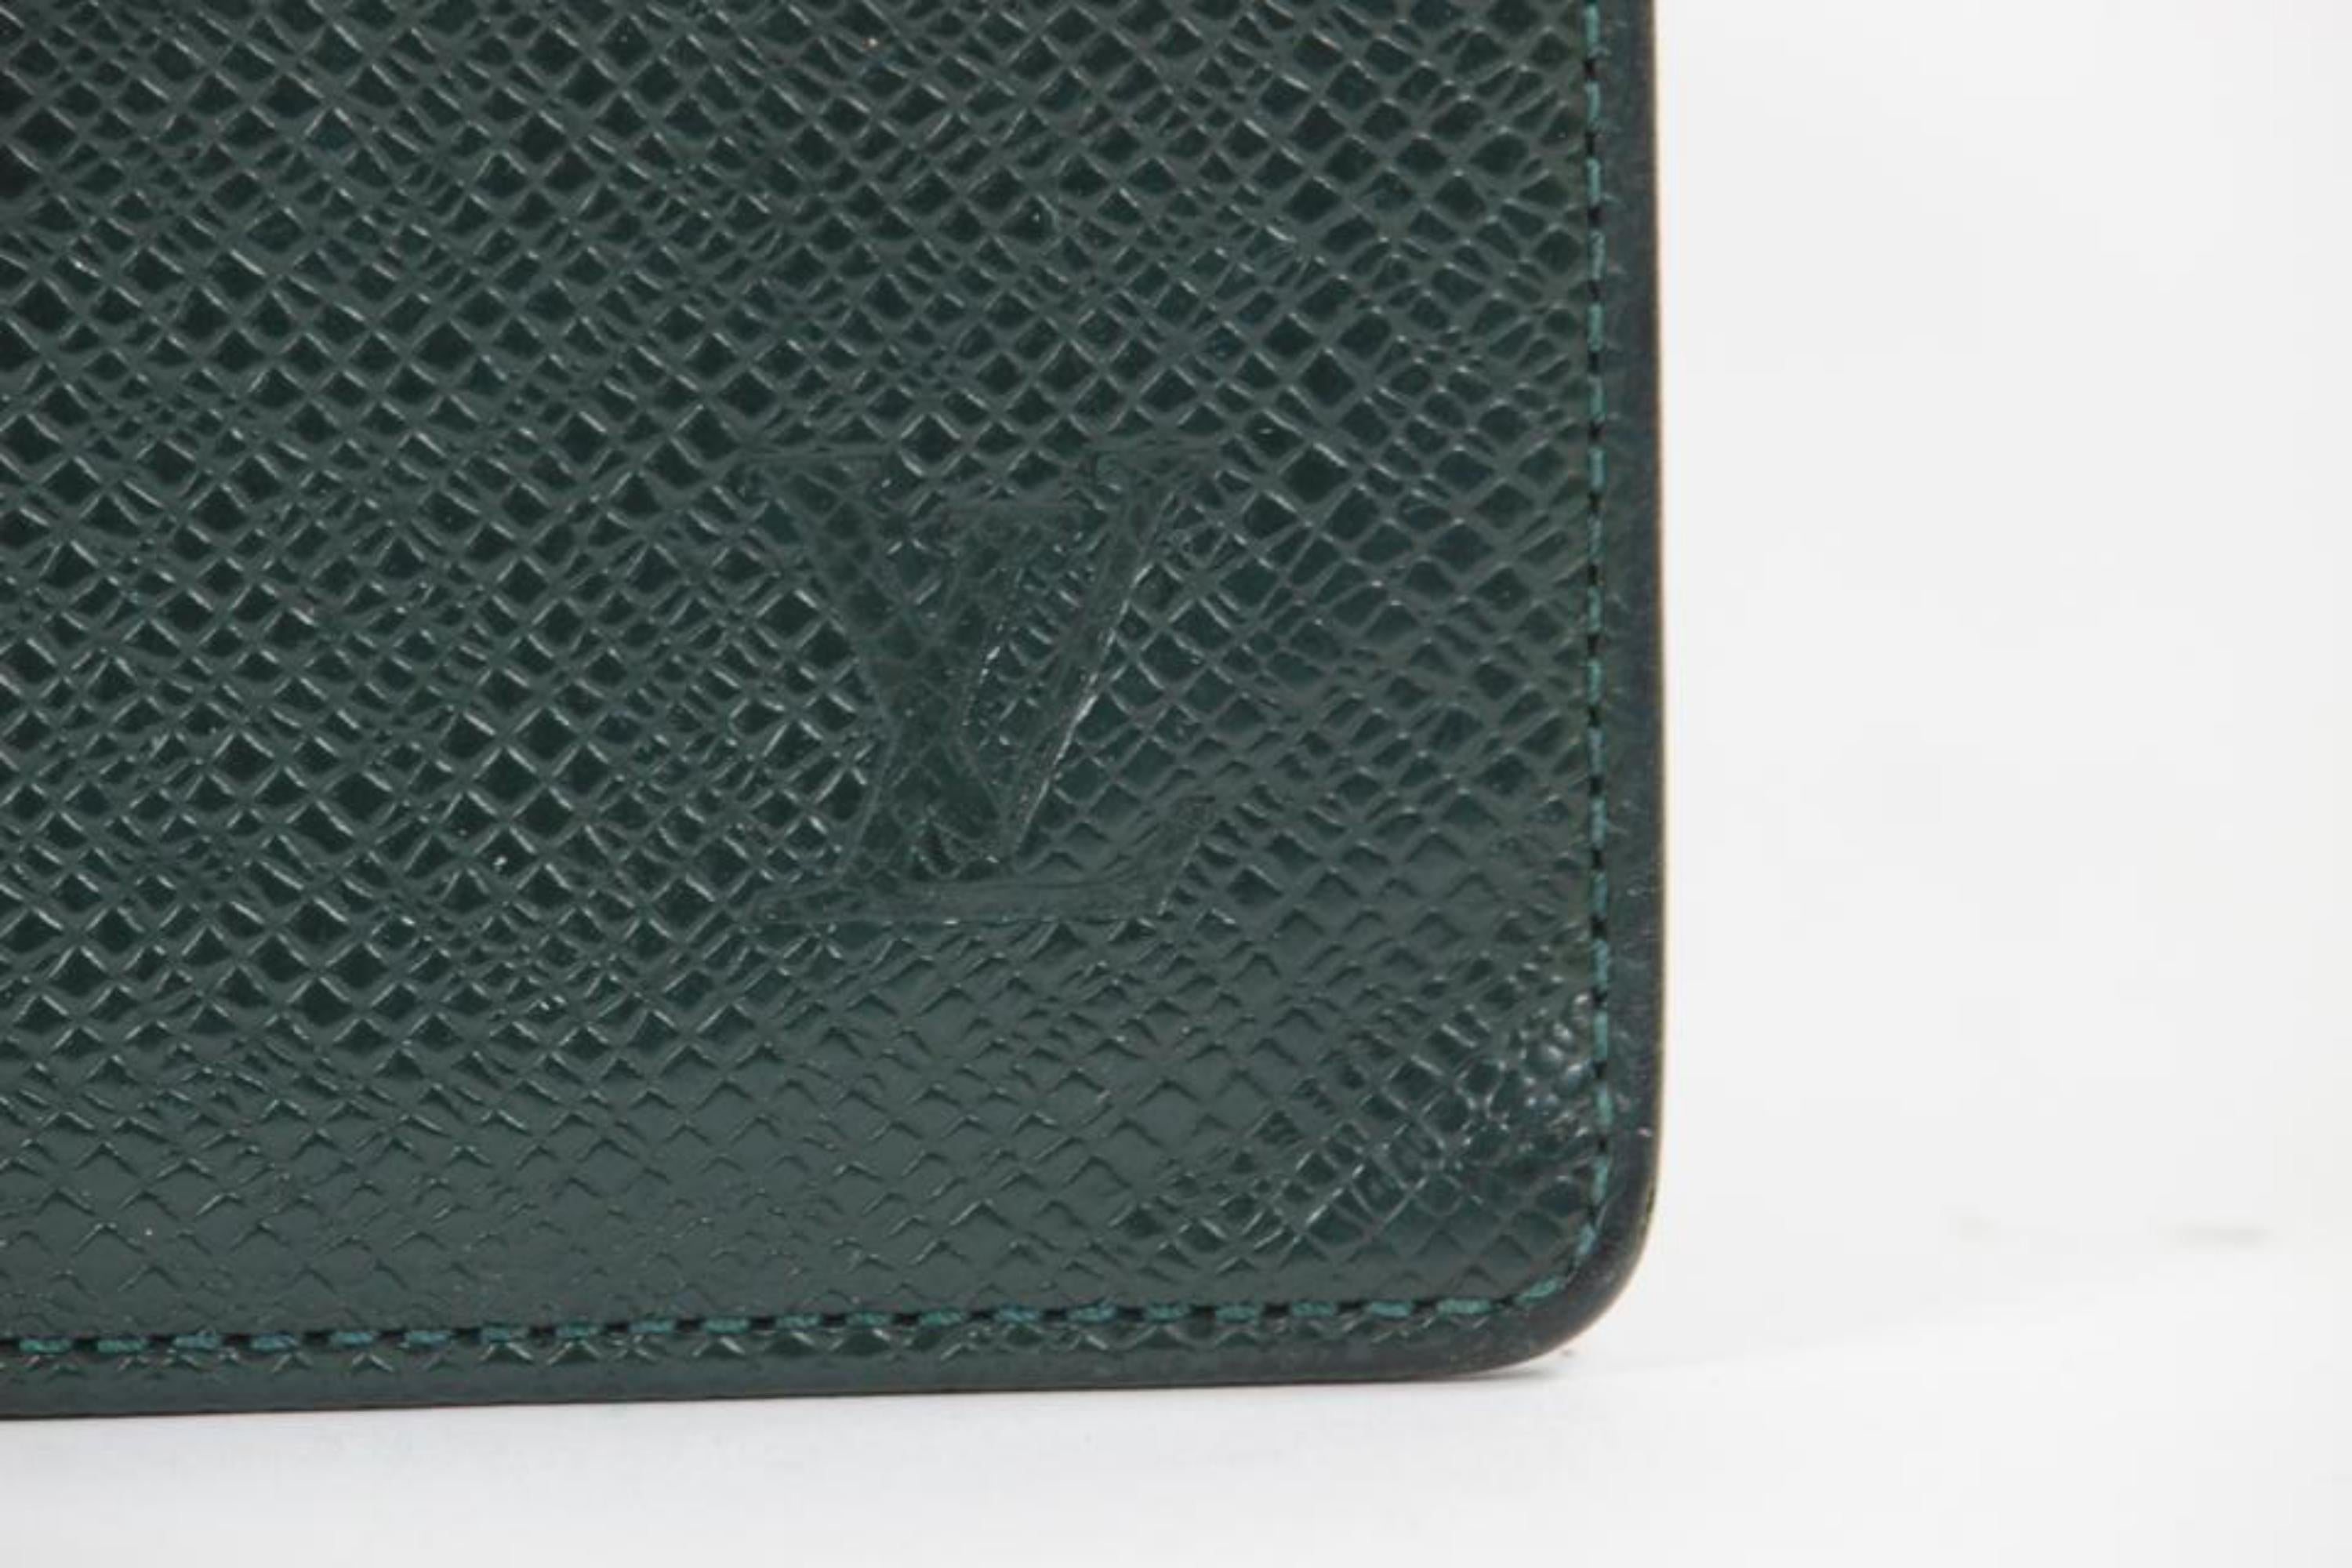 Louis Vuitton Dark Green Taiga Leather Brazza Wallet Long Card Holder 16lv1103 In Fair Condition For Sale In Dix hills, NY